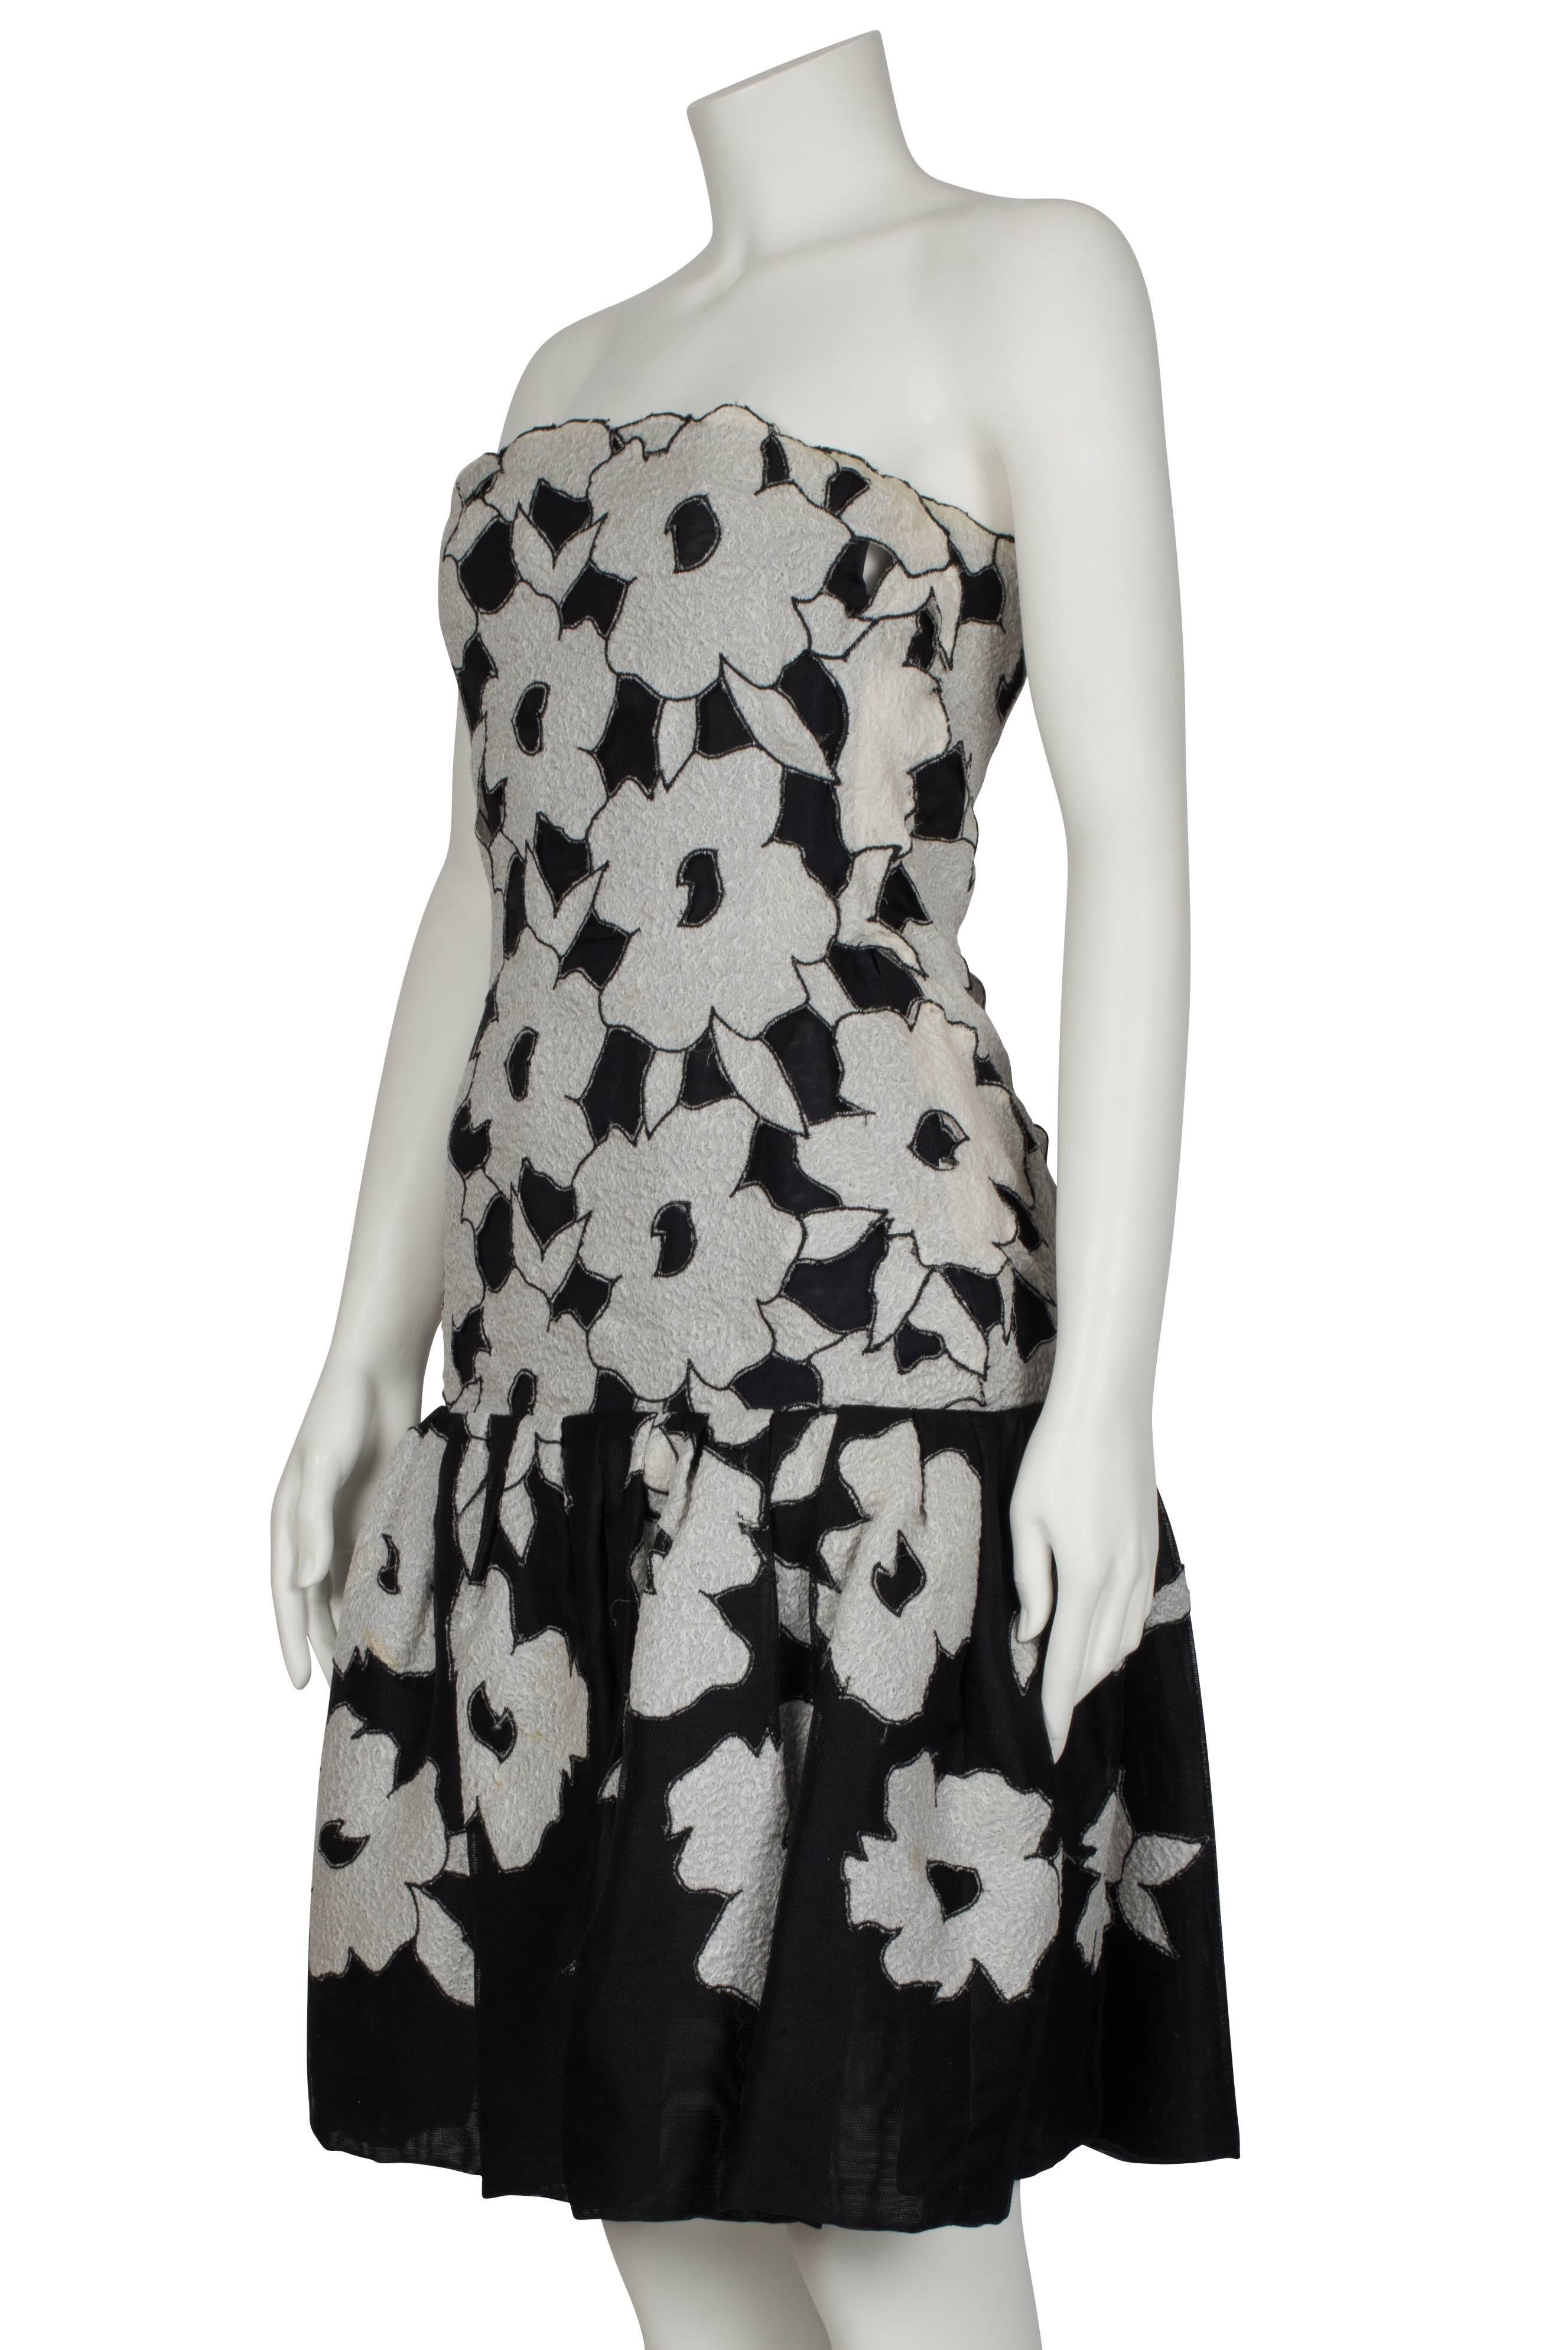 Christian Dior Couture Monochrome Floral Bandeau Dress Spring/Summer 1983 In Excellent Condition For Sale In London, GB